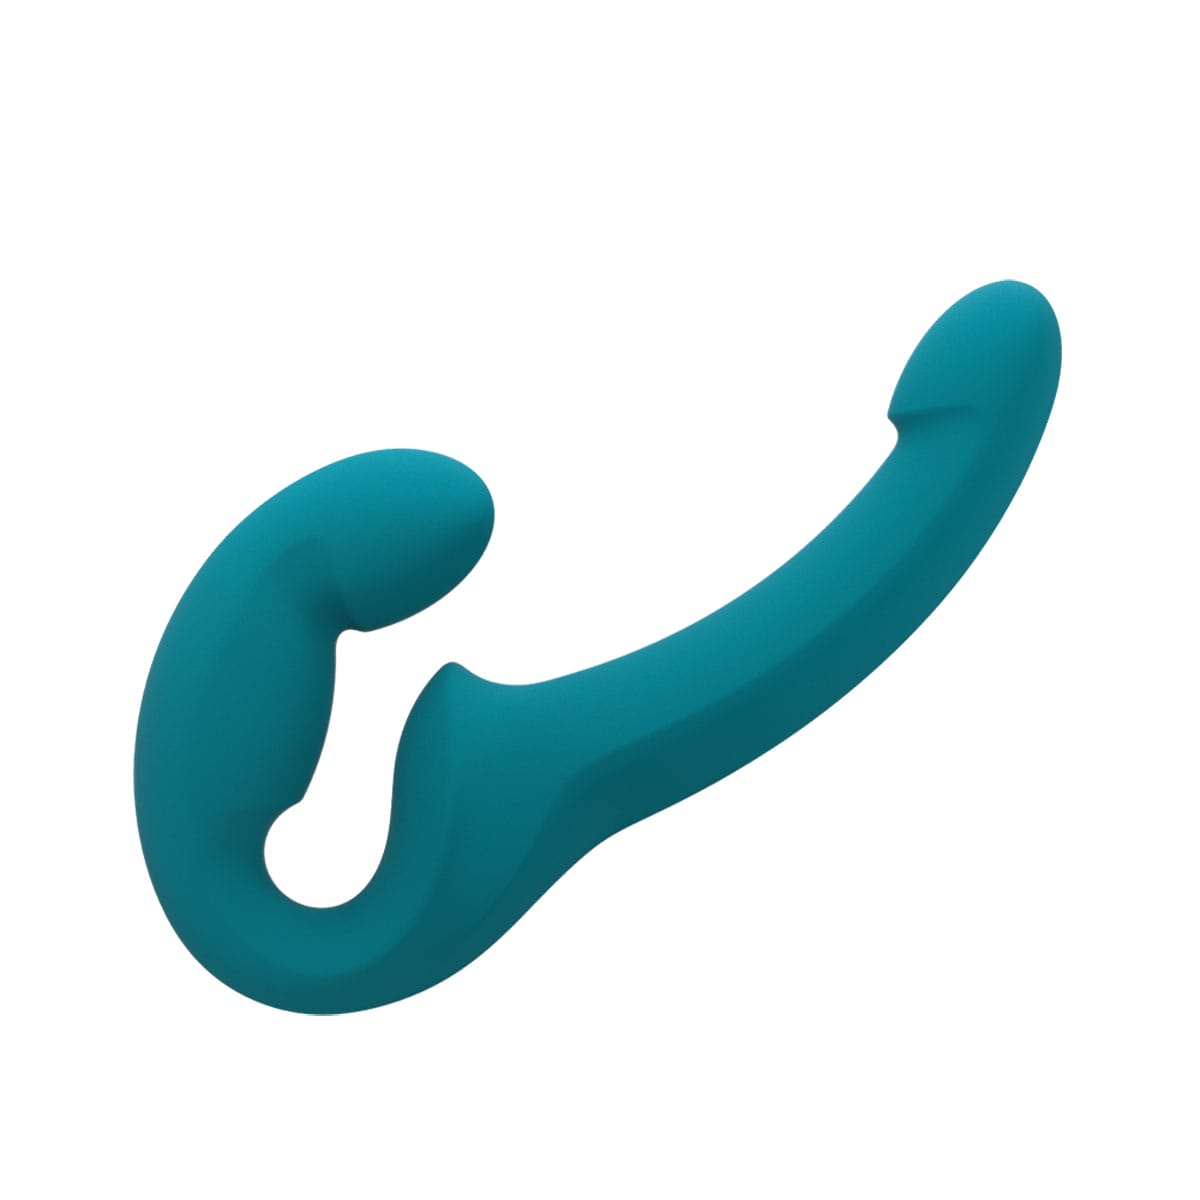 Buy Fun Factory Share Lite   Deep Sea Blue  long and 1.59 thick dildo made by Fun Factory.